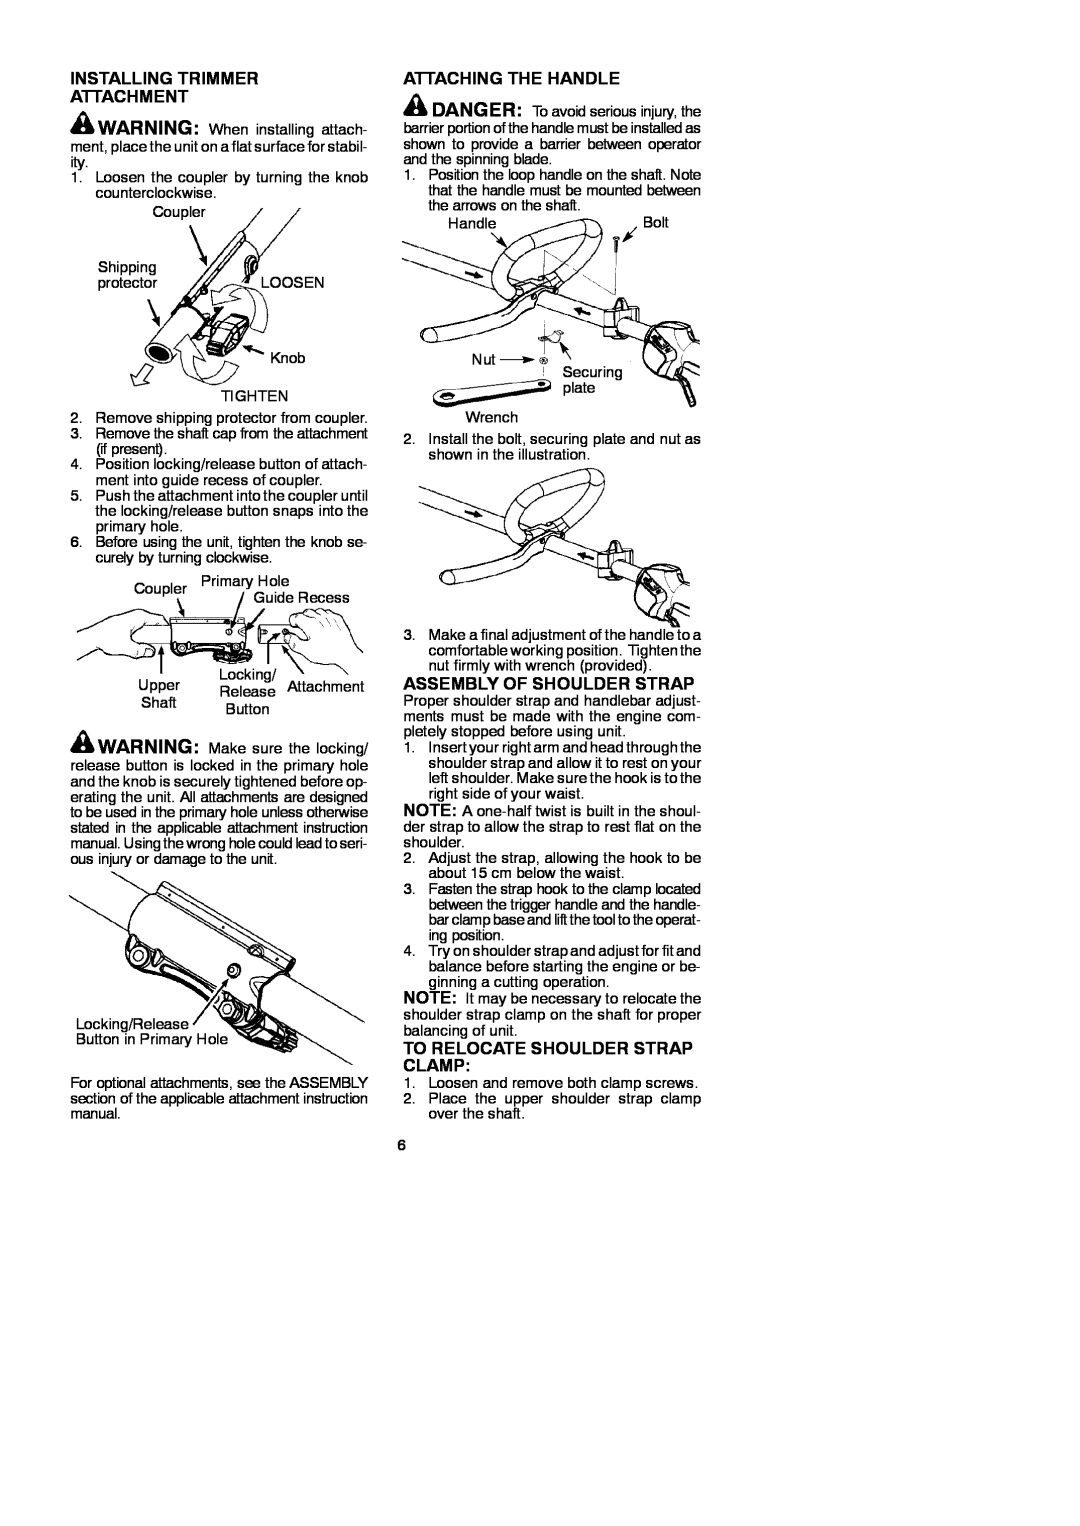 McCulloch 952715745, 433L, 115306026 Installing Trimmer Attachment, Attaching The Handle, Assembly Of Shoulder Strap 